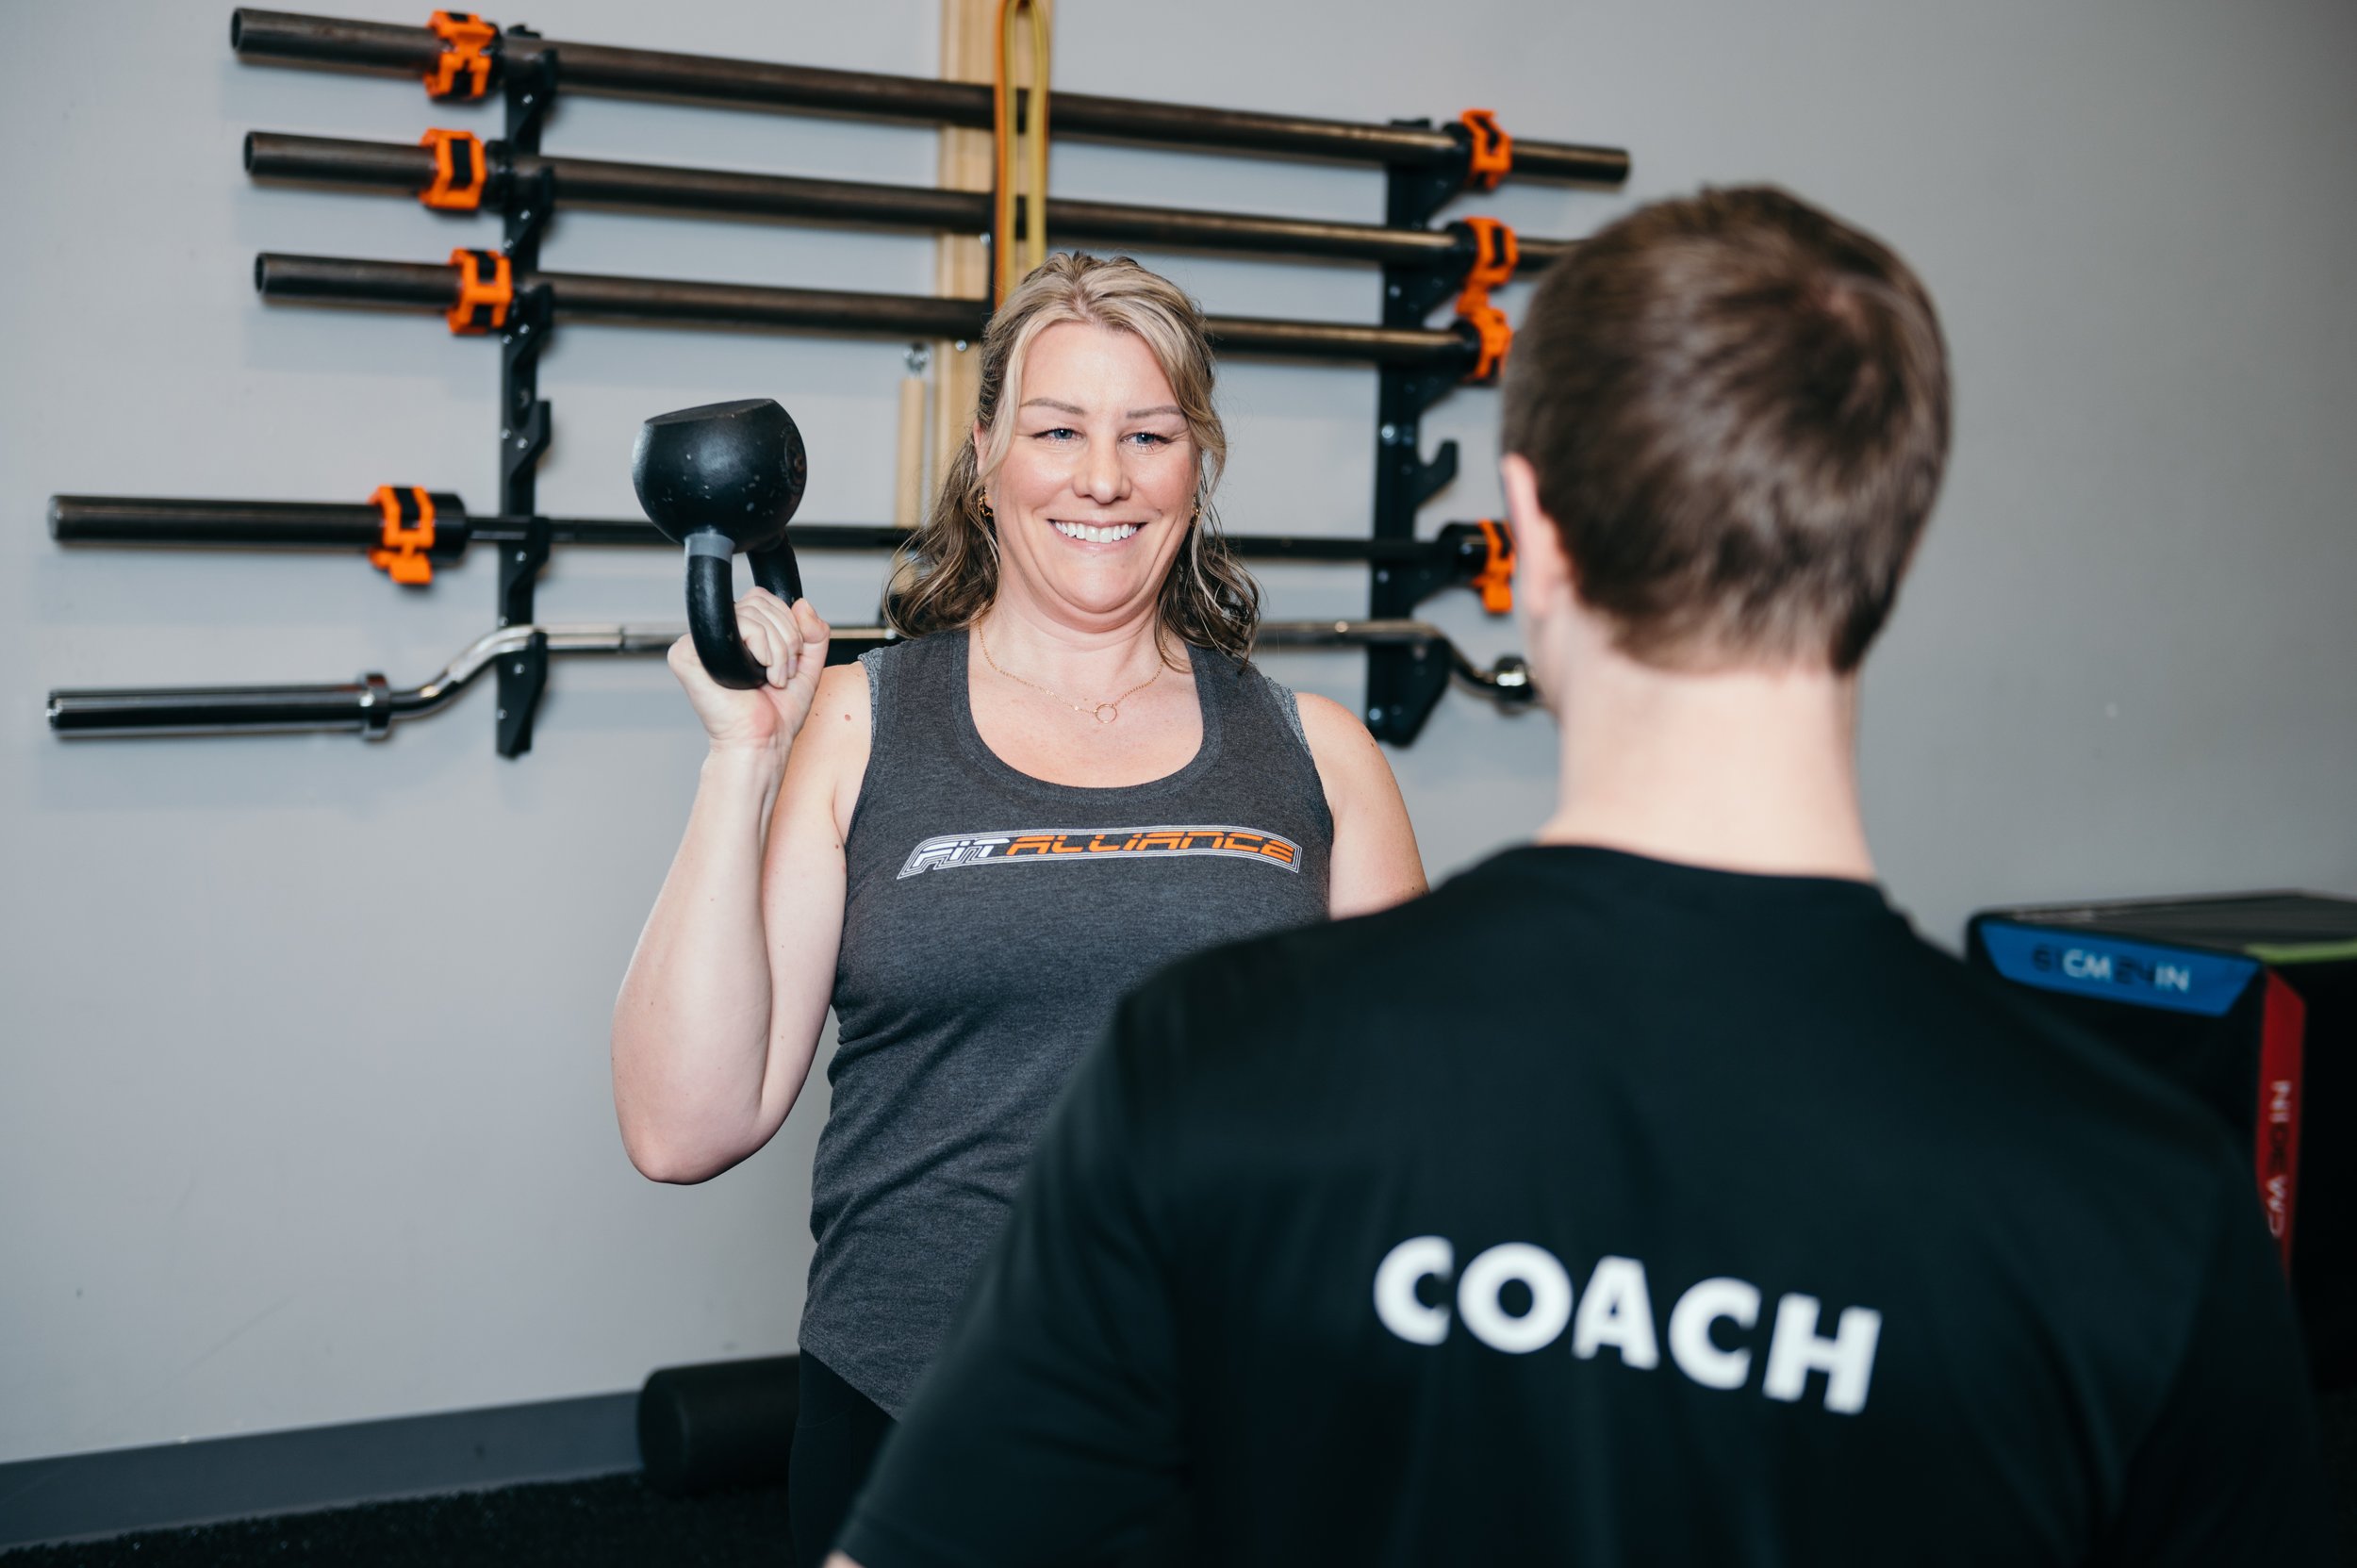 A woman holds a dumbbell in front of a couch from FIT ALLIANCE.